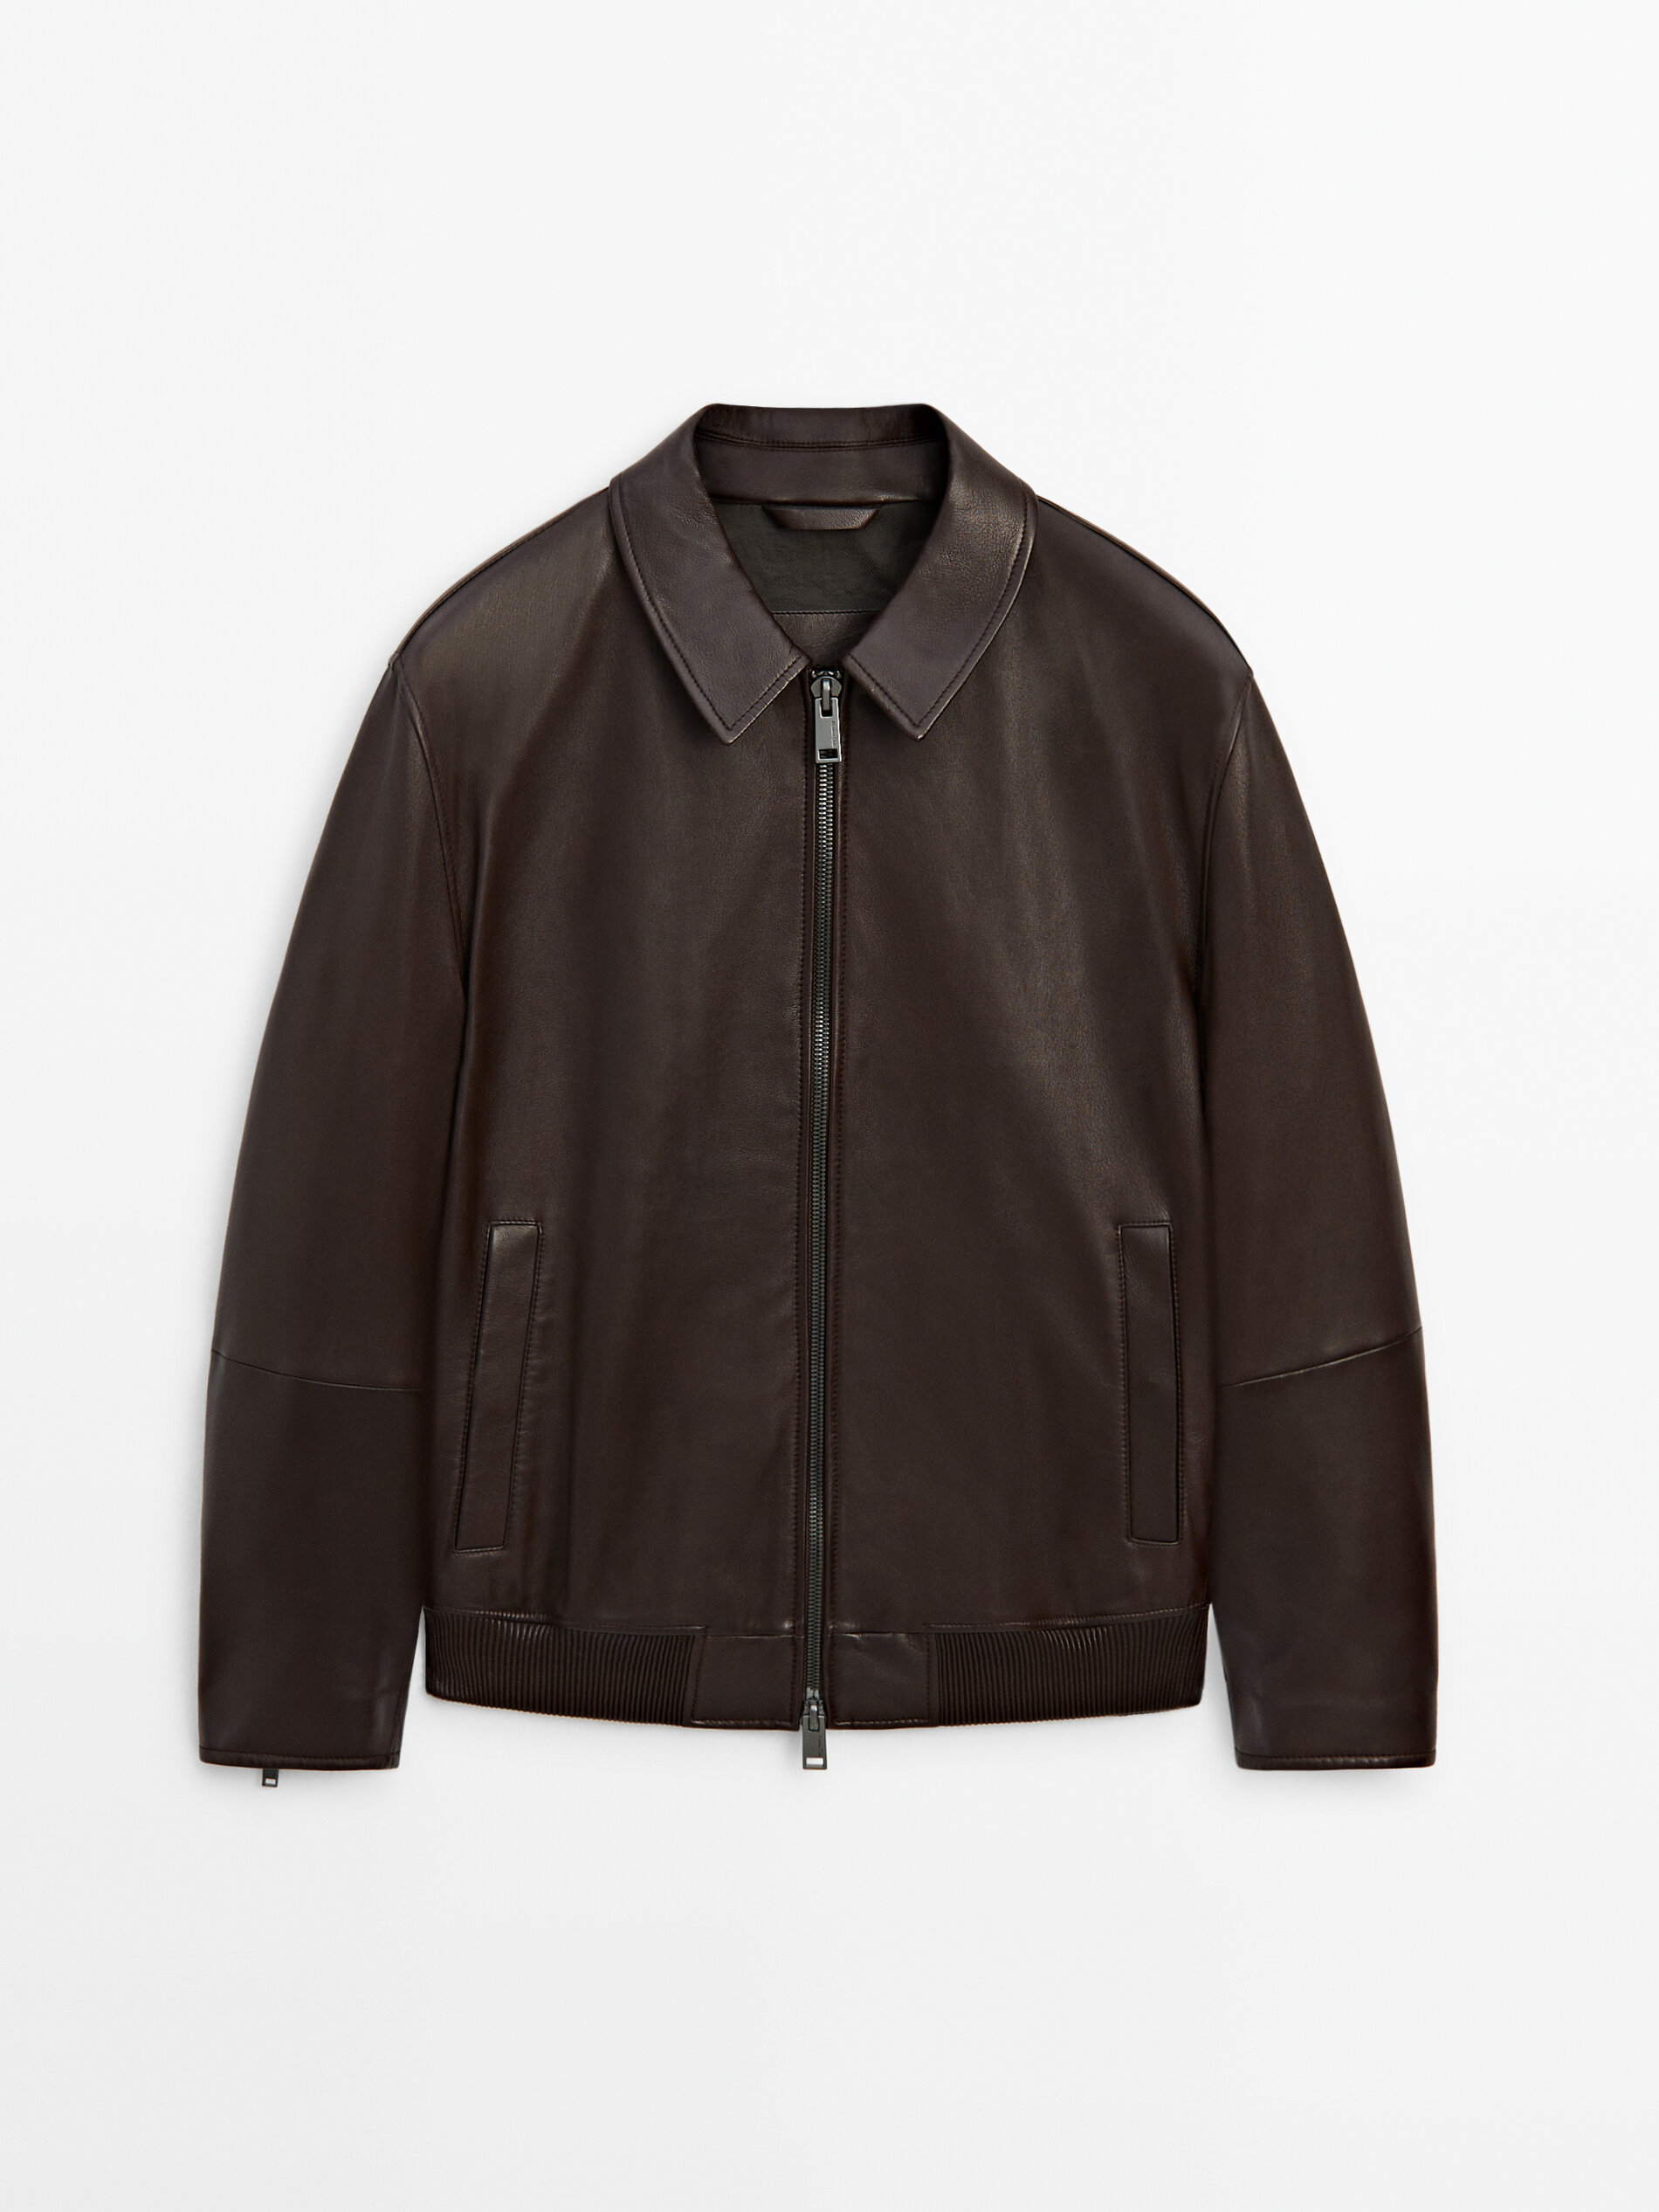 Brown nappa leather jacket